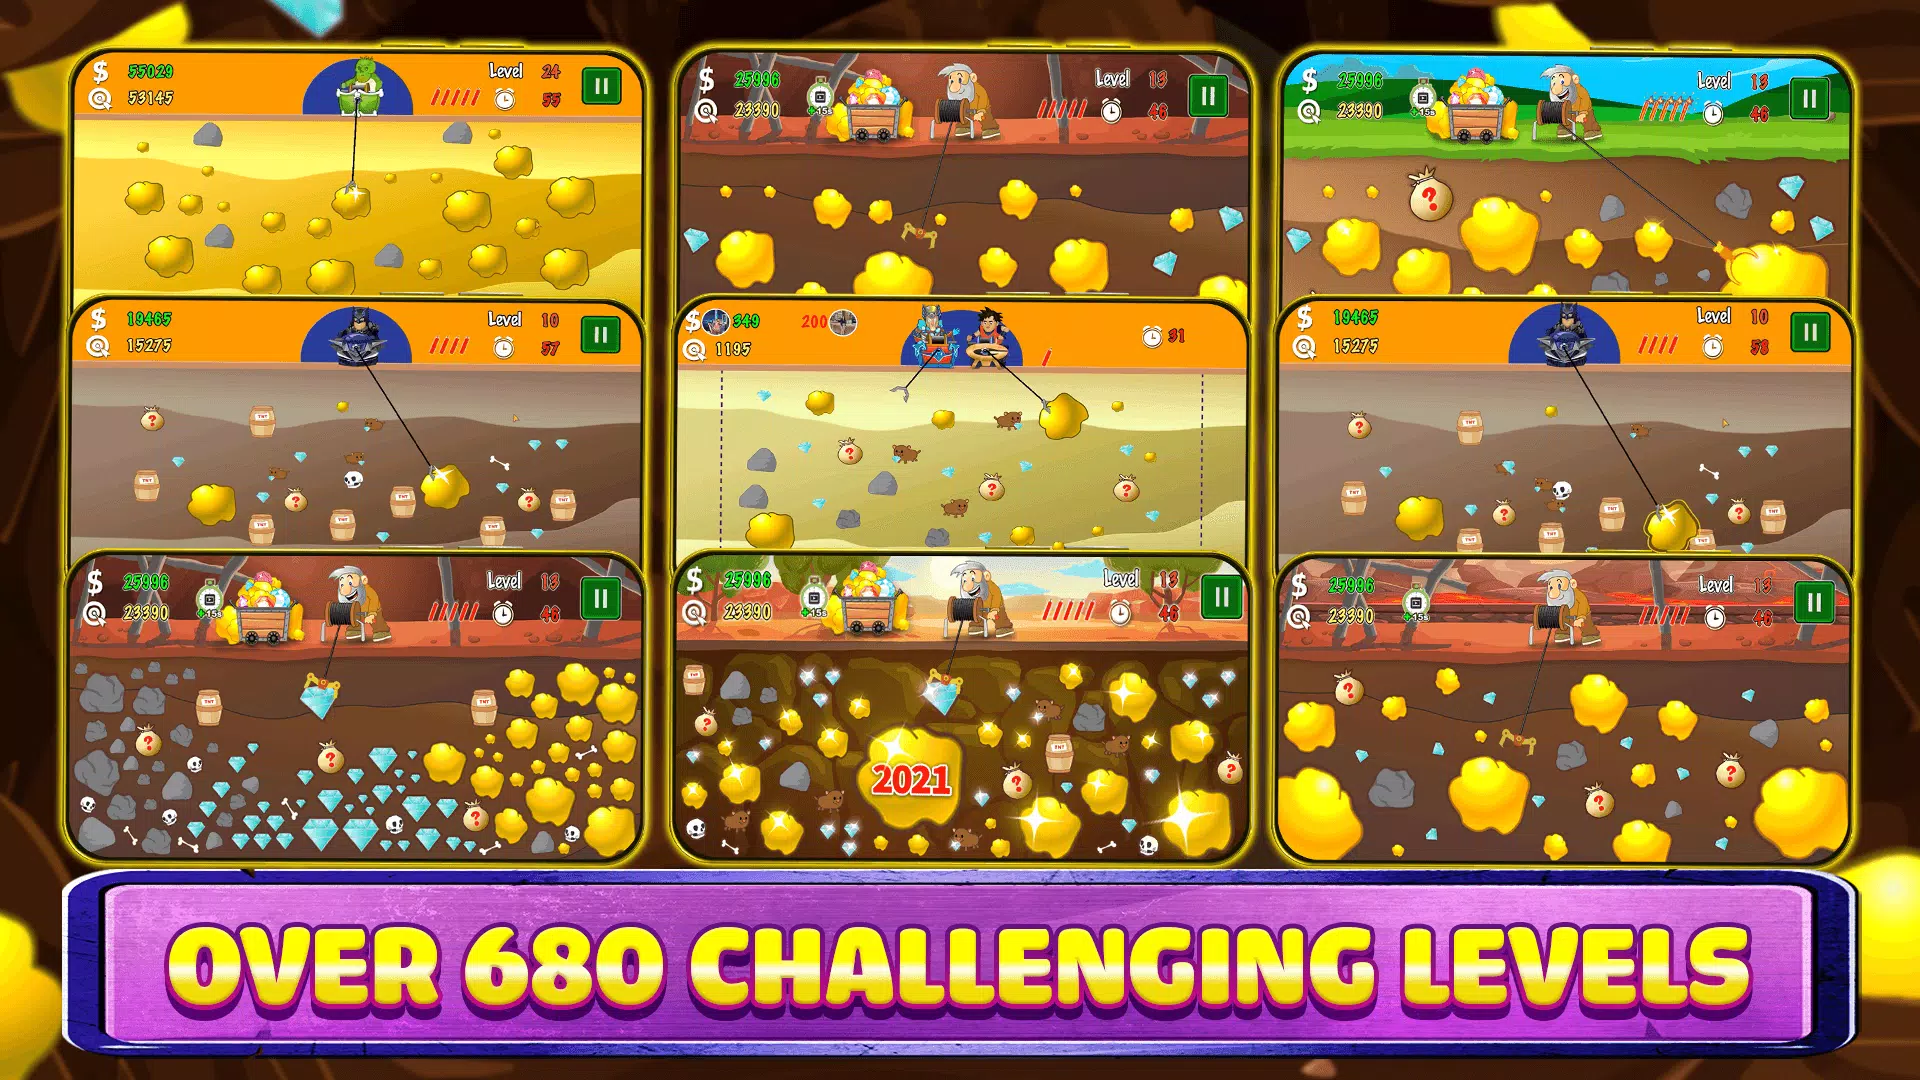 Gold Miner Adventure - APK Download for Android